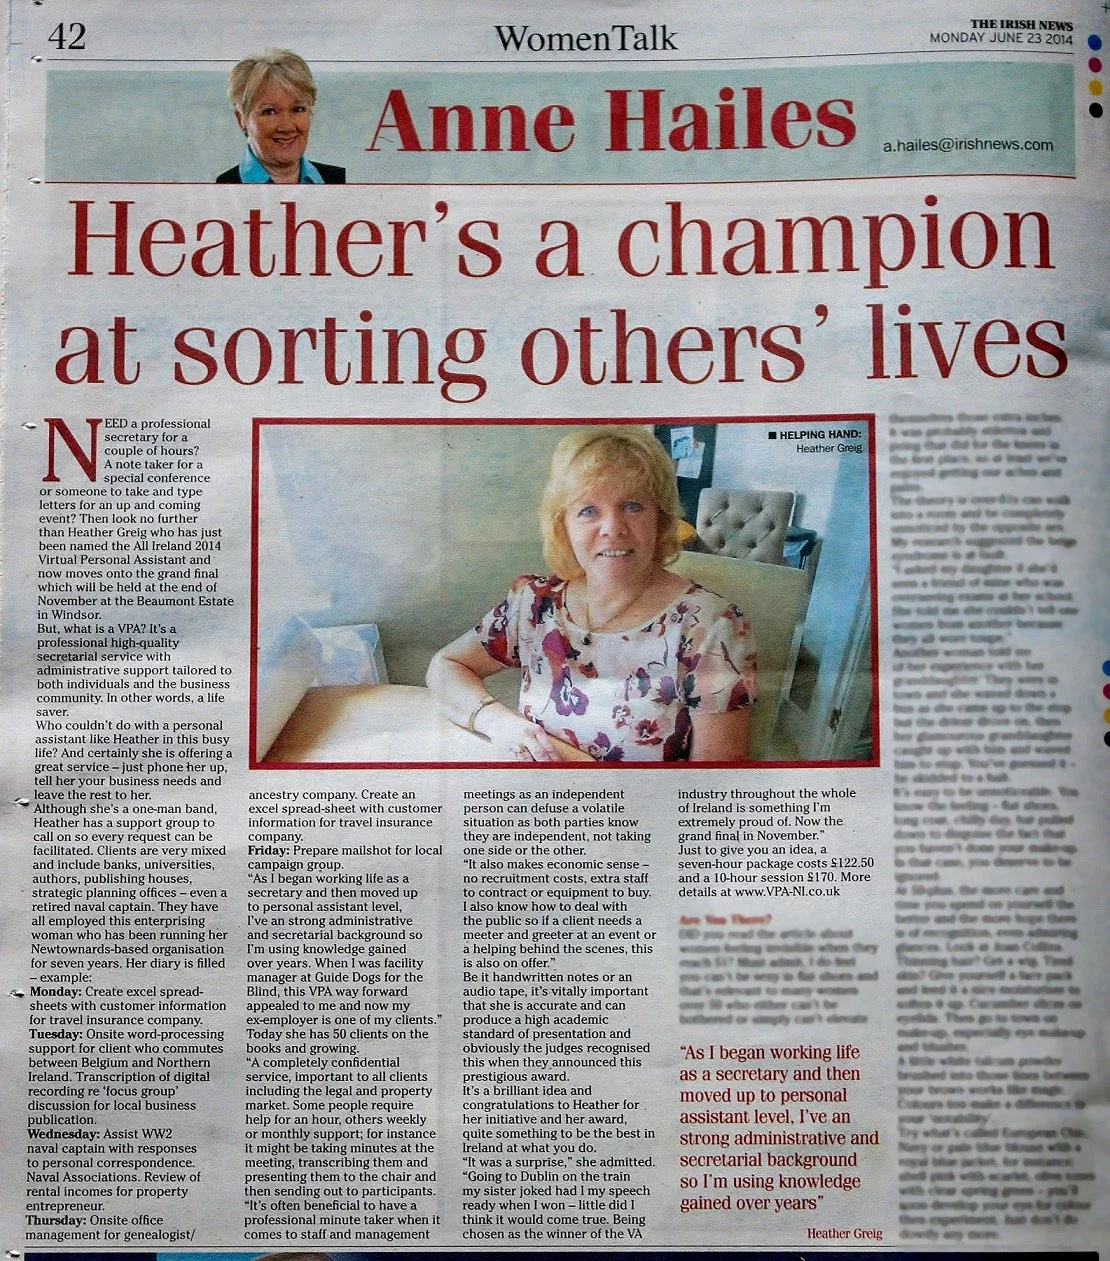 "Heather's a champion at sorting others lives." reports Ann Hailes.







